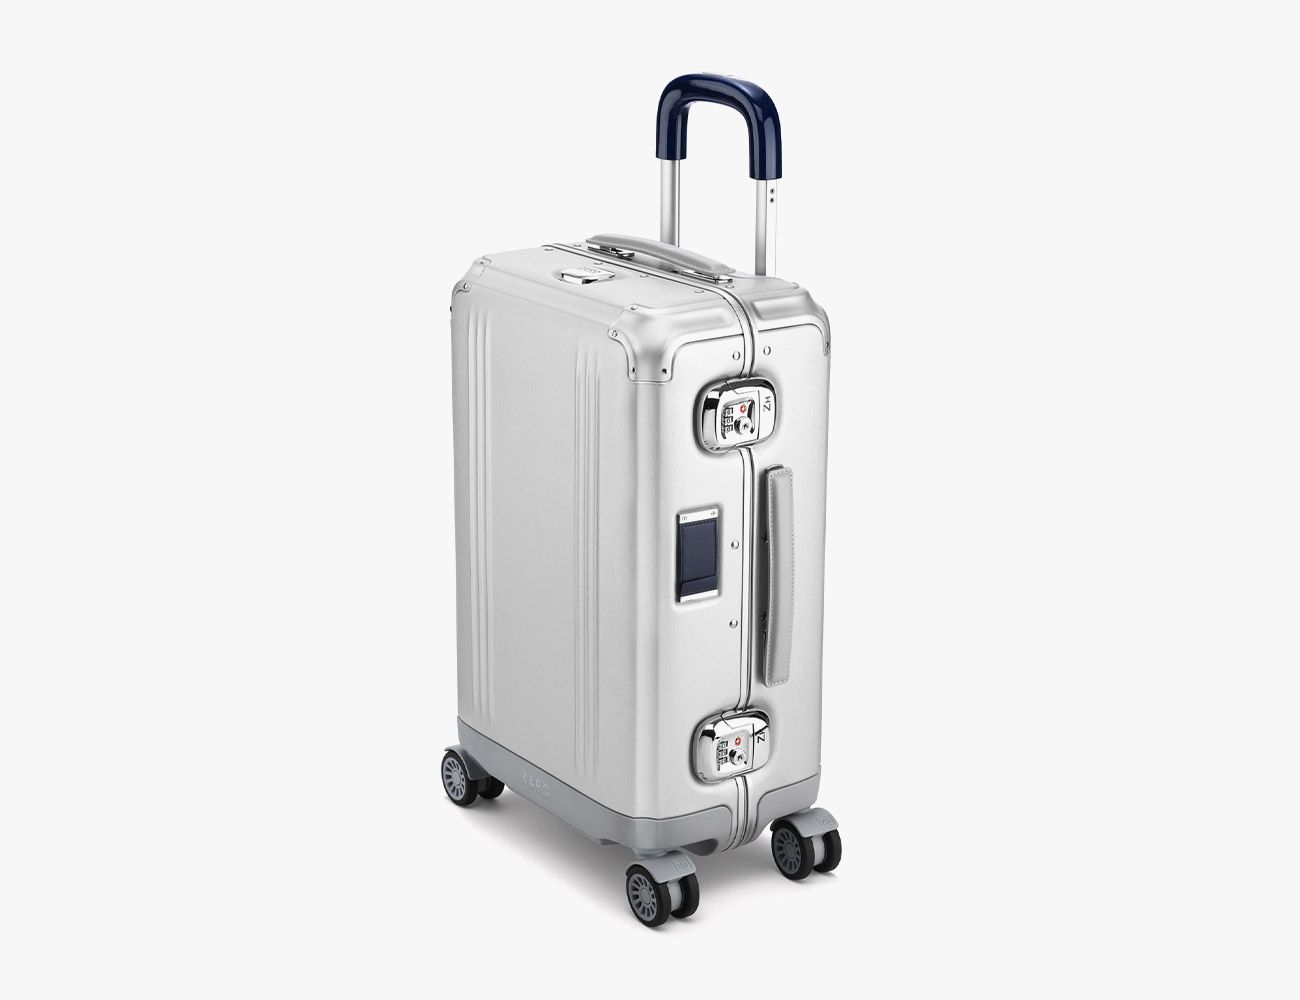 Mini Luggage, Aluminum Alloy Mini Suitcase Strong Attractive with